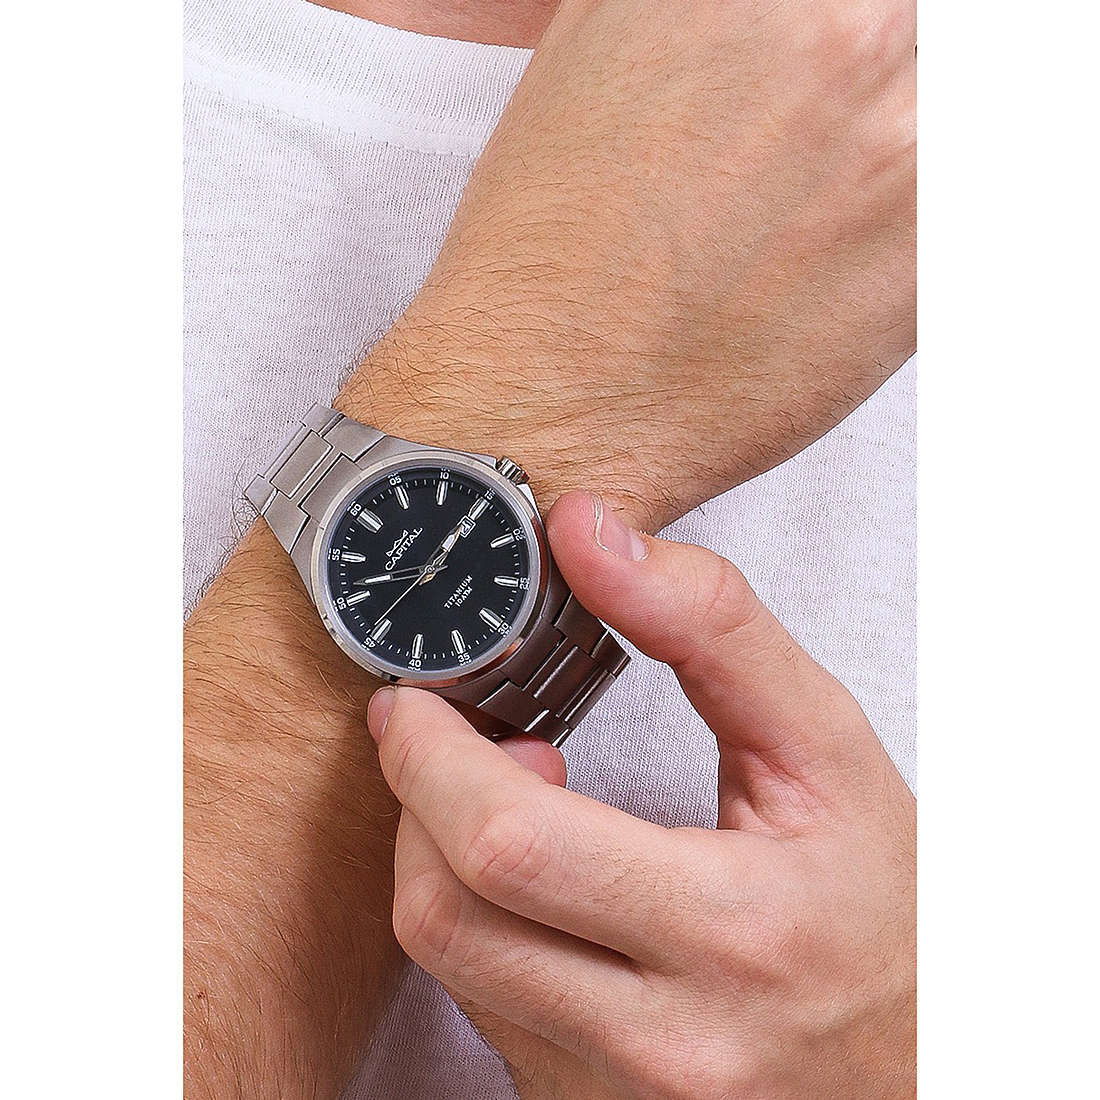 Capital only time Titanio man AX395-3 wearing